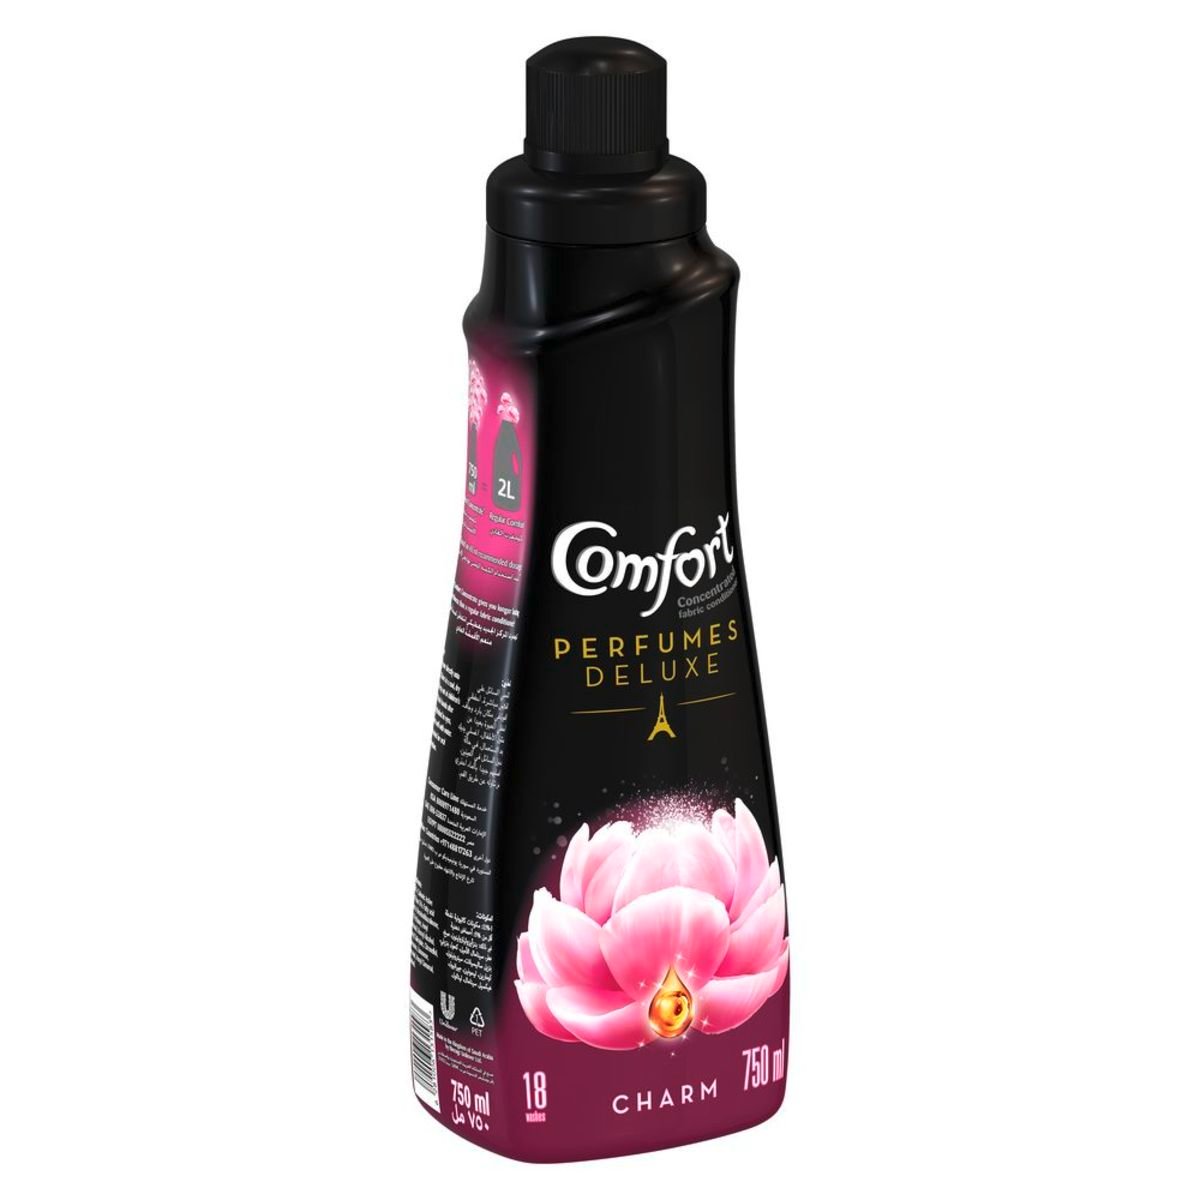 Comfort Perfumes Deluxe Concentrated Fabric Softener Charm 750ml